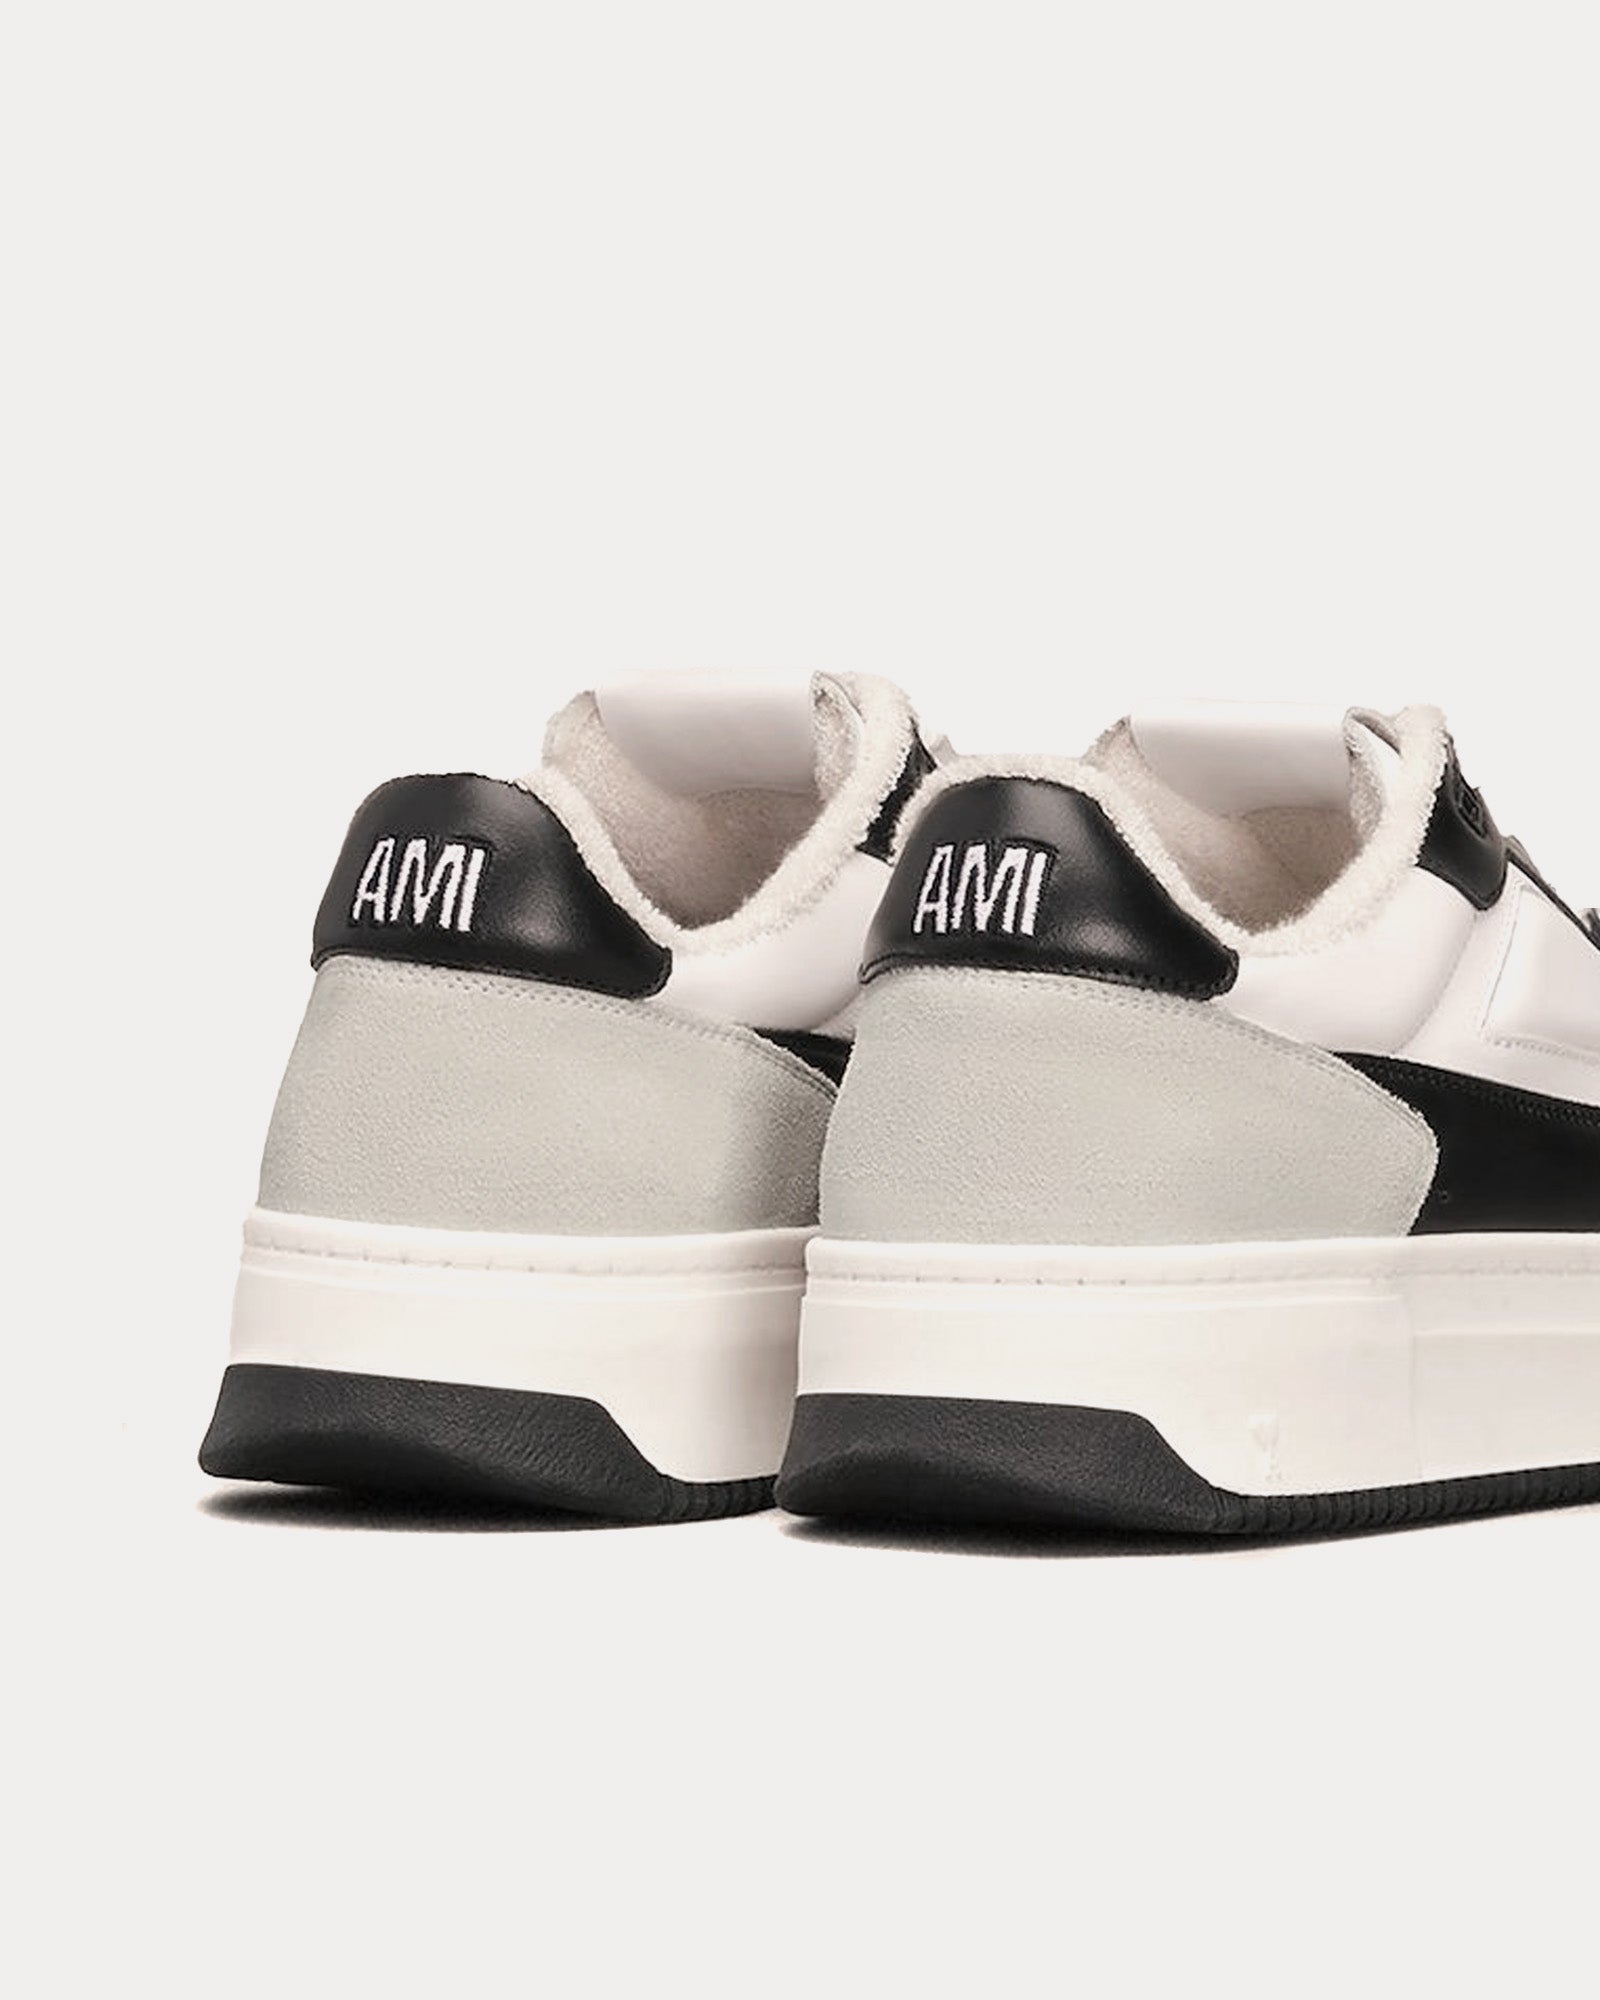 AMI - Arcade Leather White / Black Low Top Sneakers